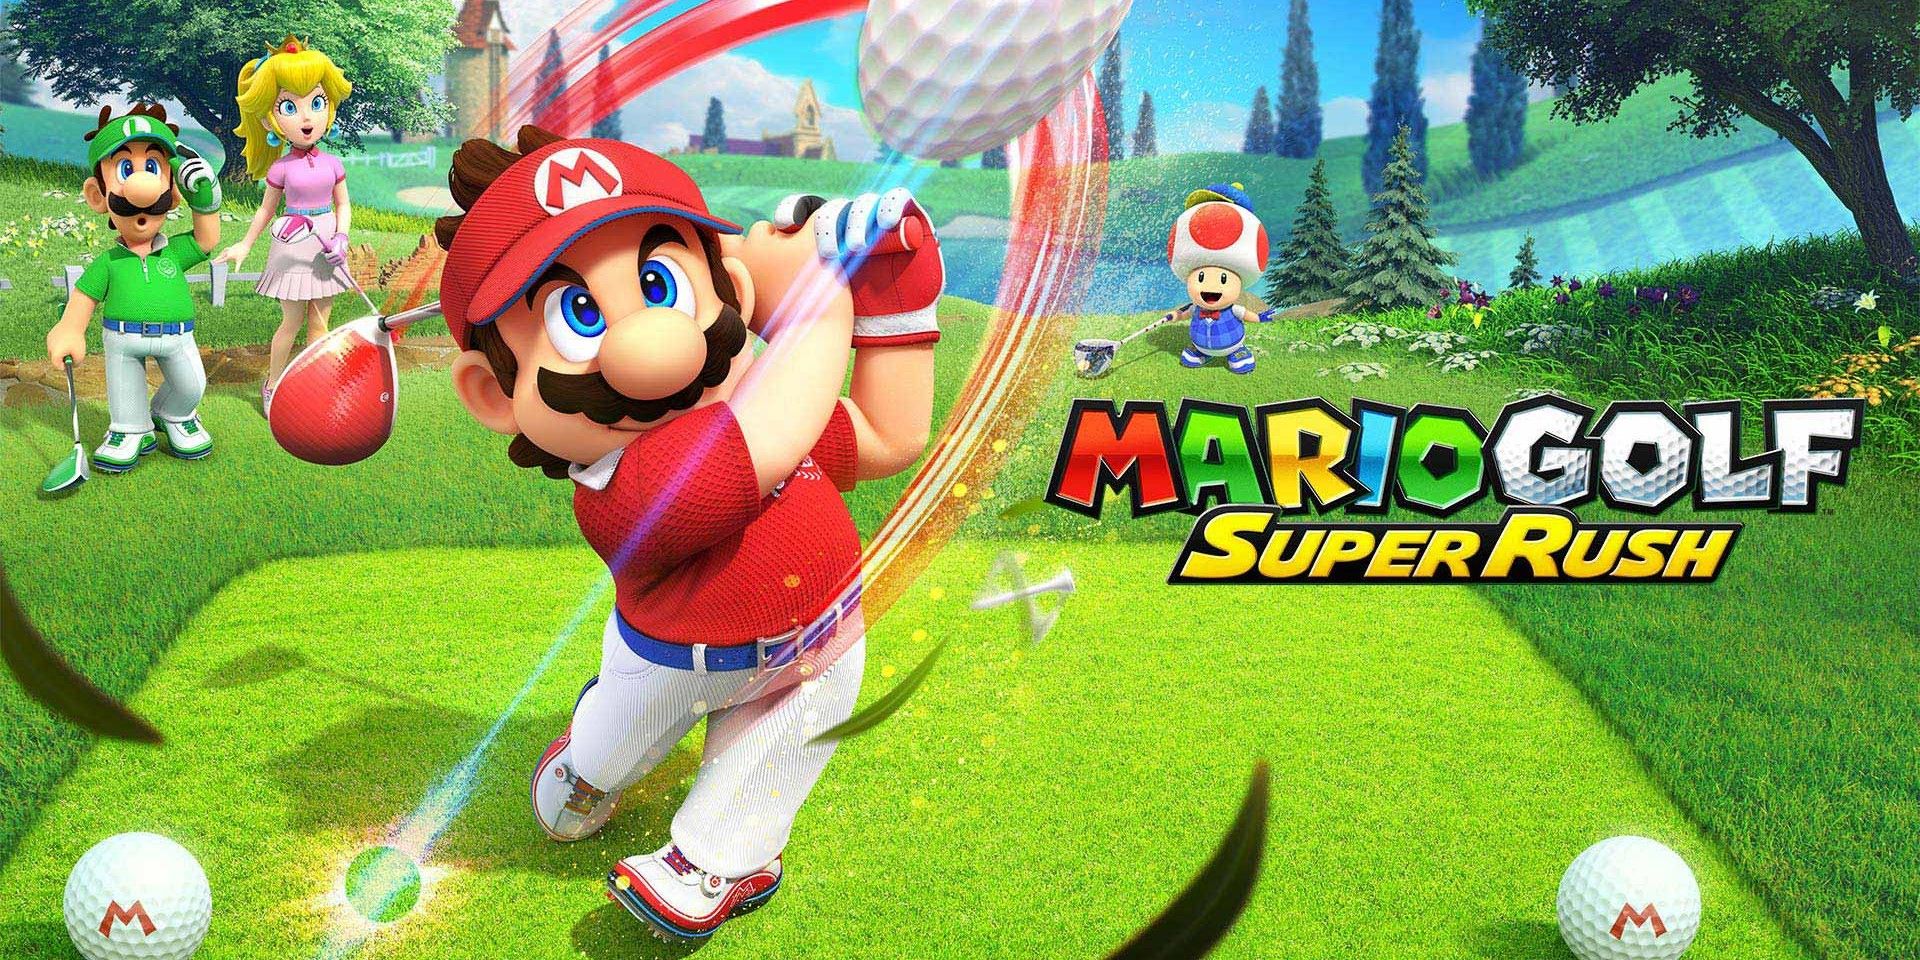 Mario Golf Super Rush Trailer Plot Release Date & News to Know